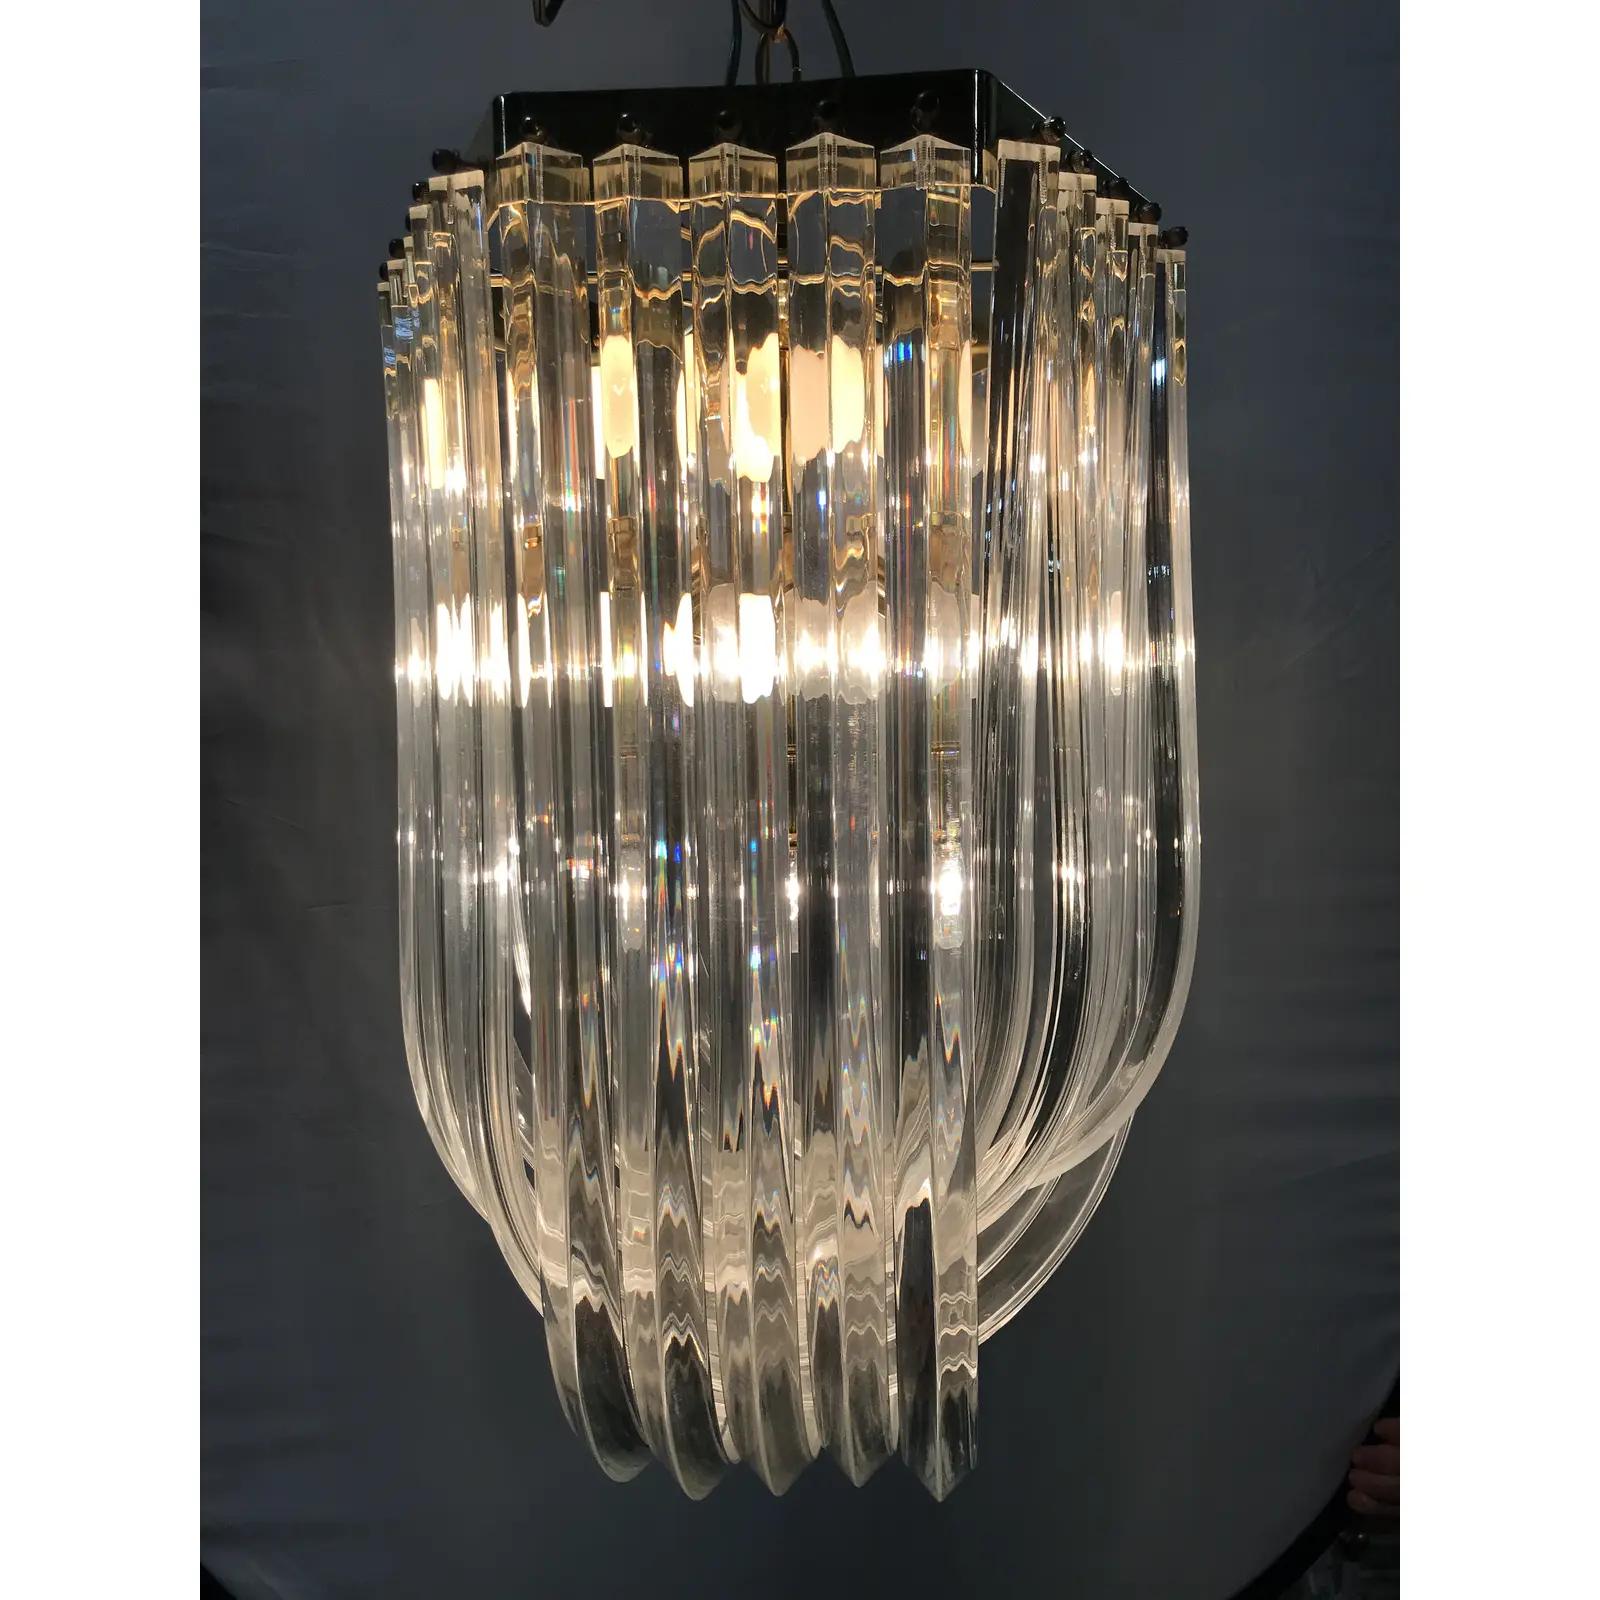 Mid-Century Modern Lucite and brass ribbon chandelier with canopy.
Wired for the U.S. and in excellent working condition.